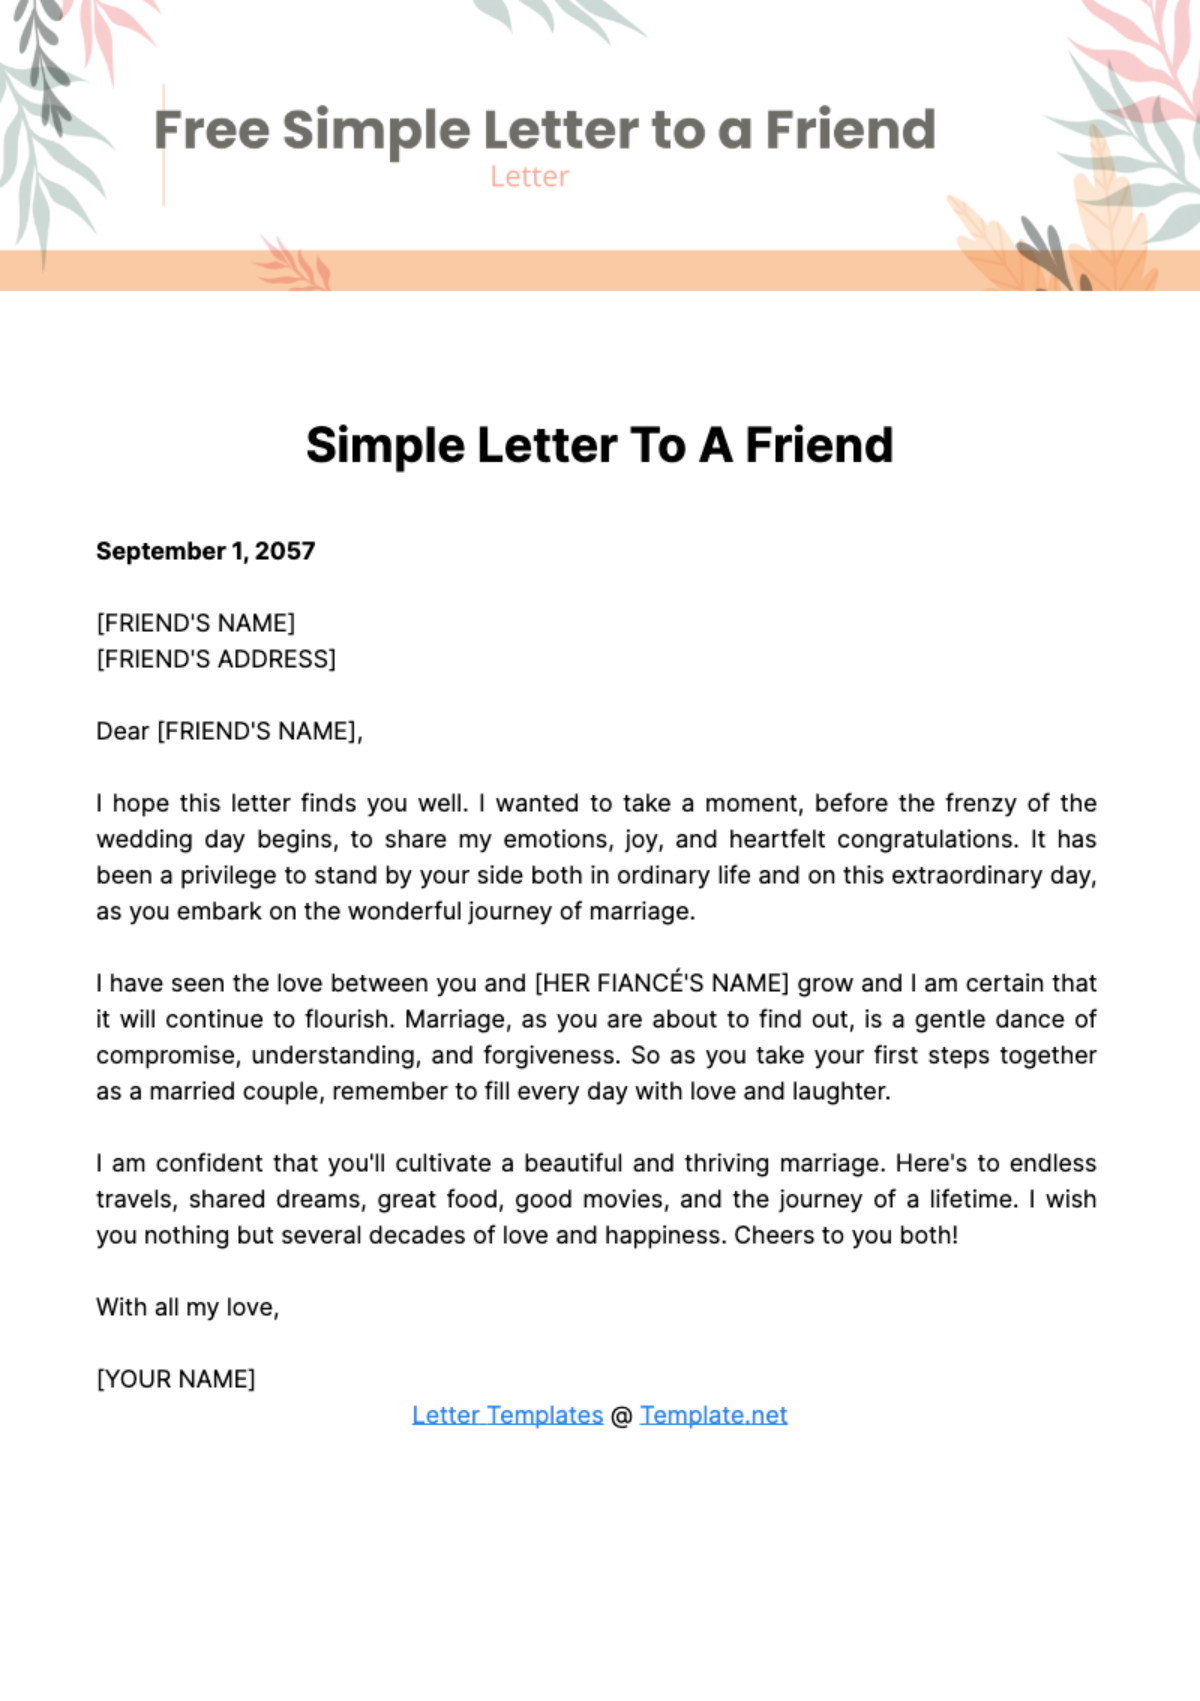 Free Simple Letter to a Friend Template